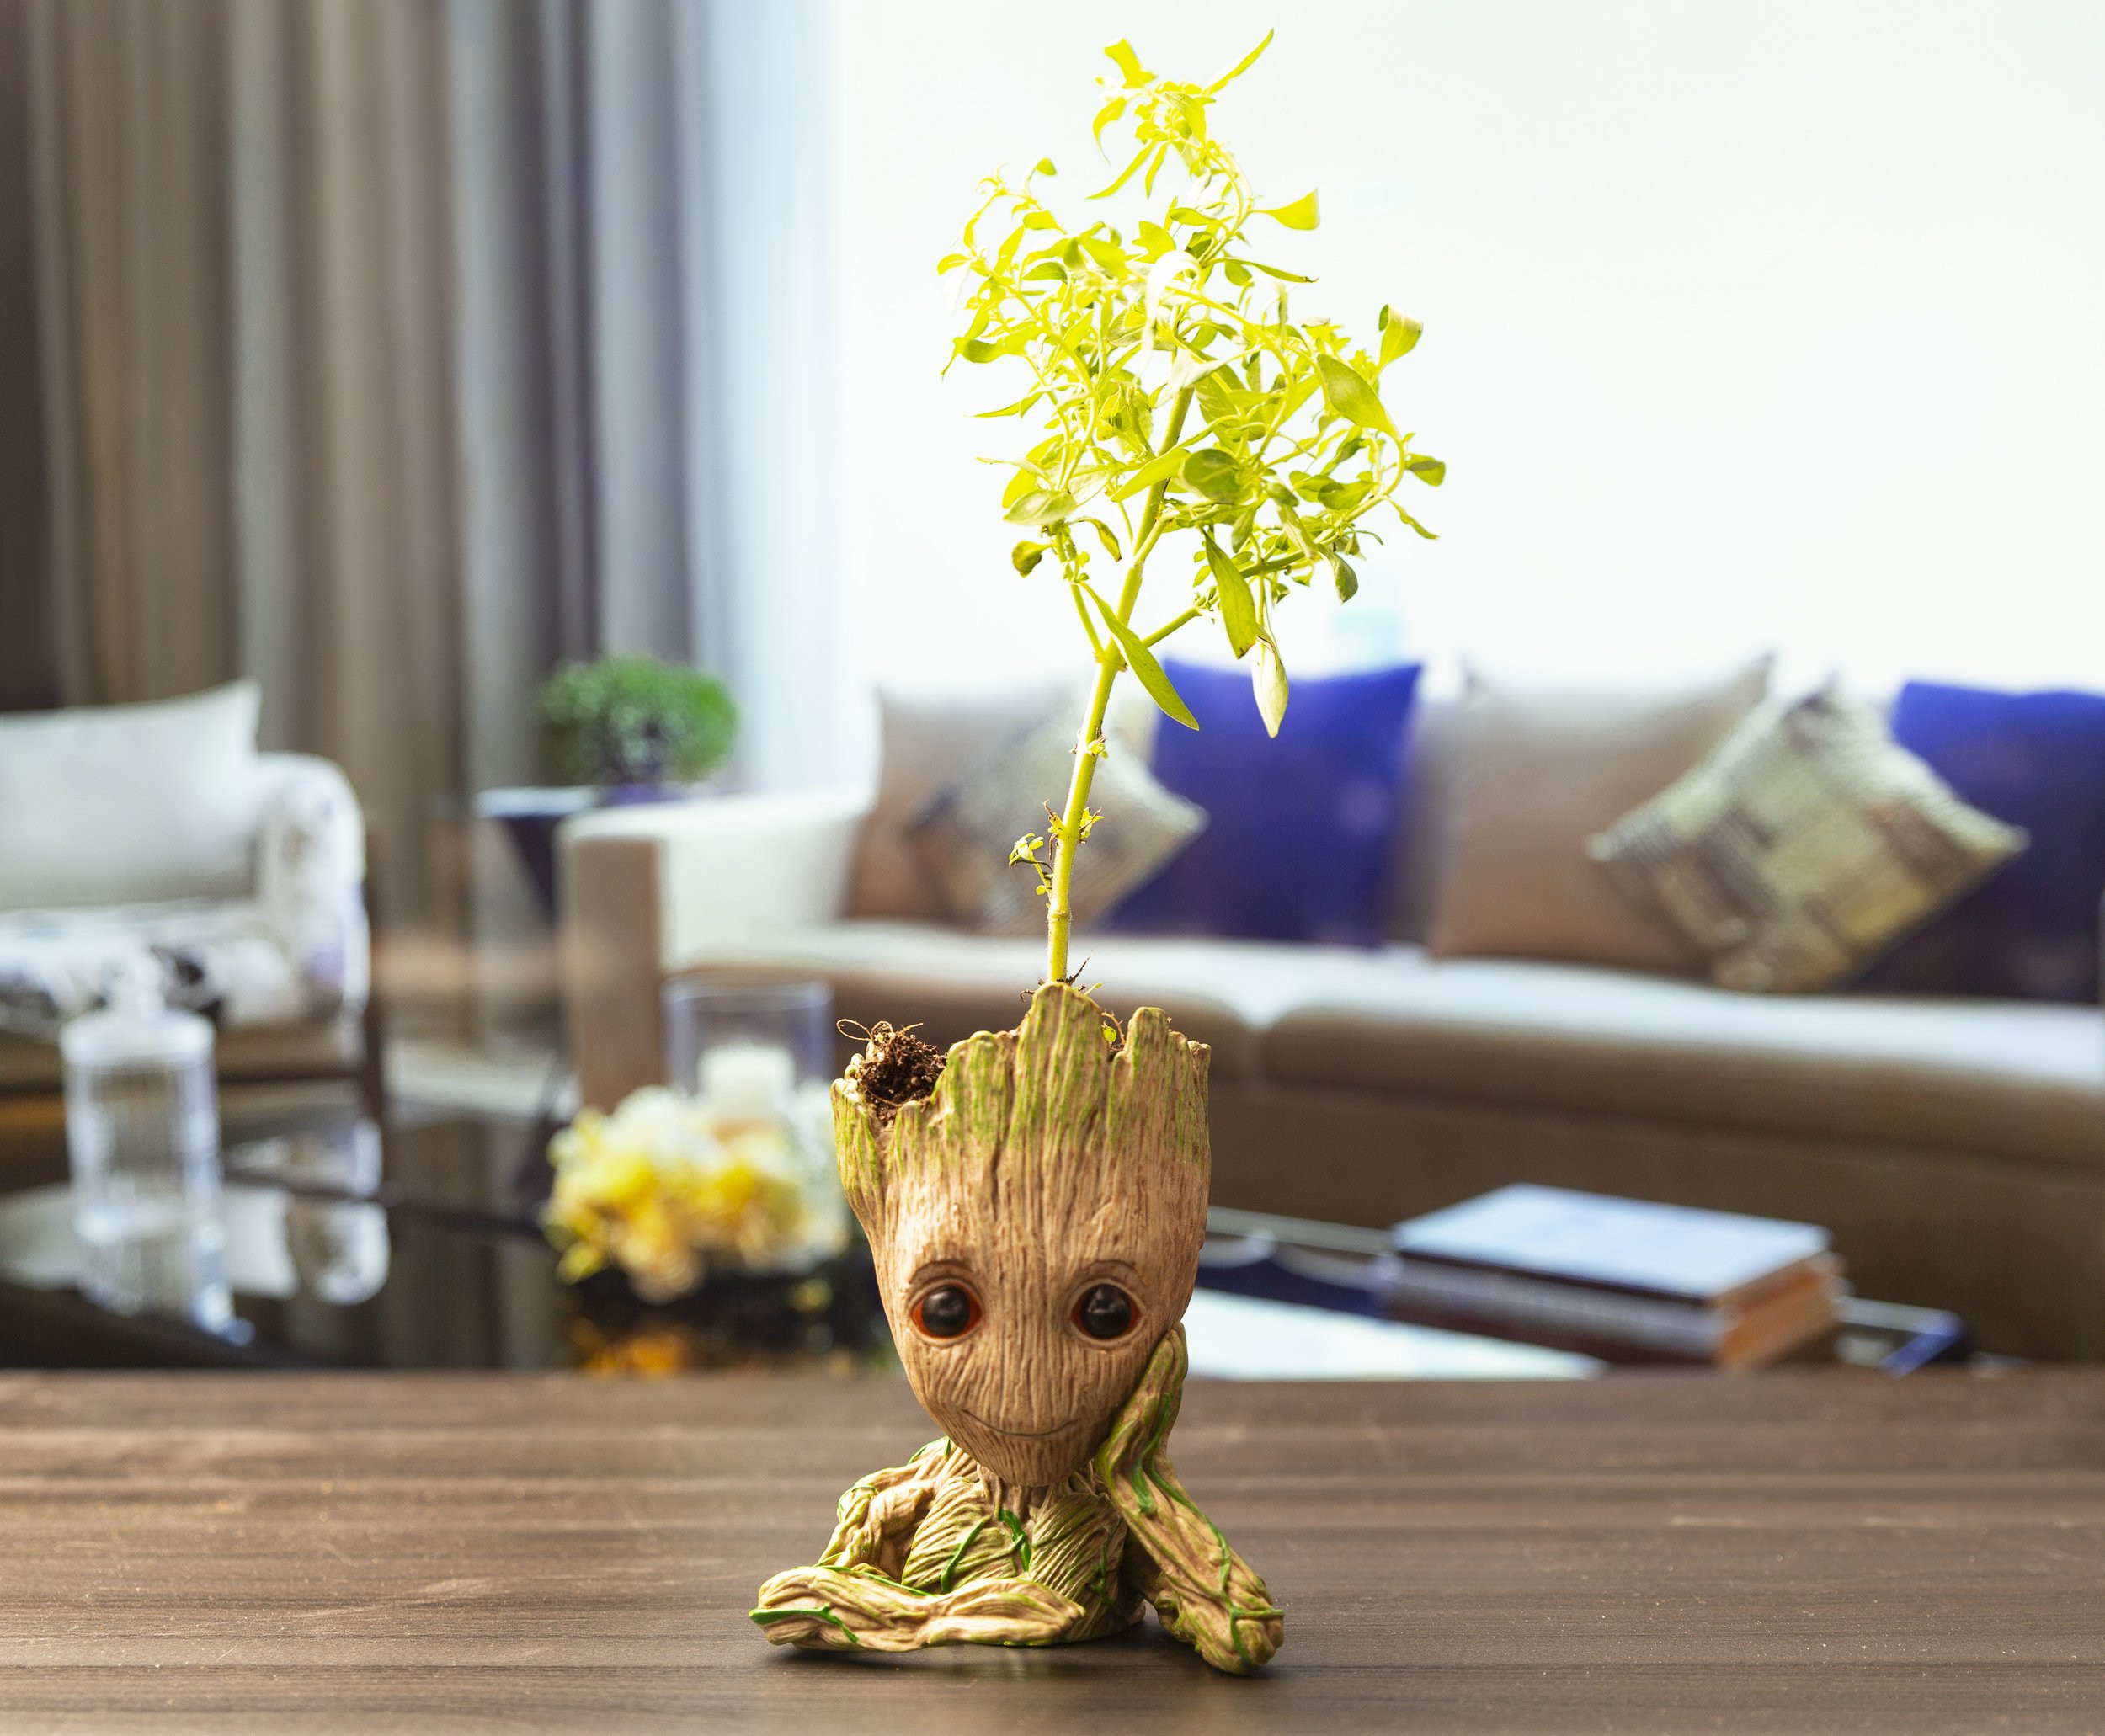 Best ideas about Baby Groot Flower Pot Amazon
. Save or Pin Greenwich Guardians of The Galaxy Baby Groot Flower Pot Now.